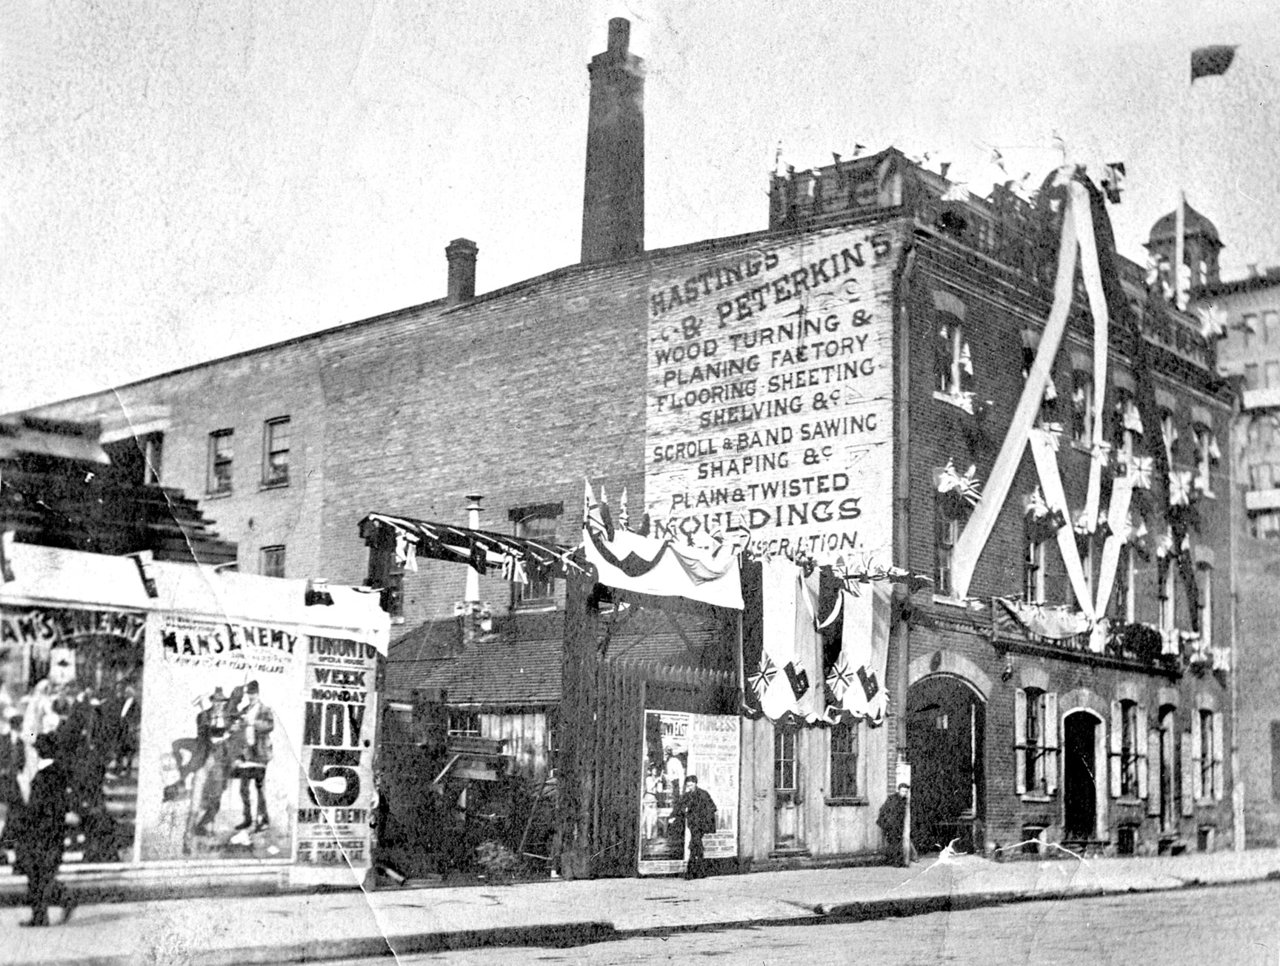 Decorations on Hastings & Peterkin's Factory (Bay St., s.w. corner Temperance St.) during a pa...jpg